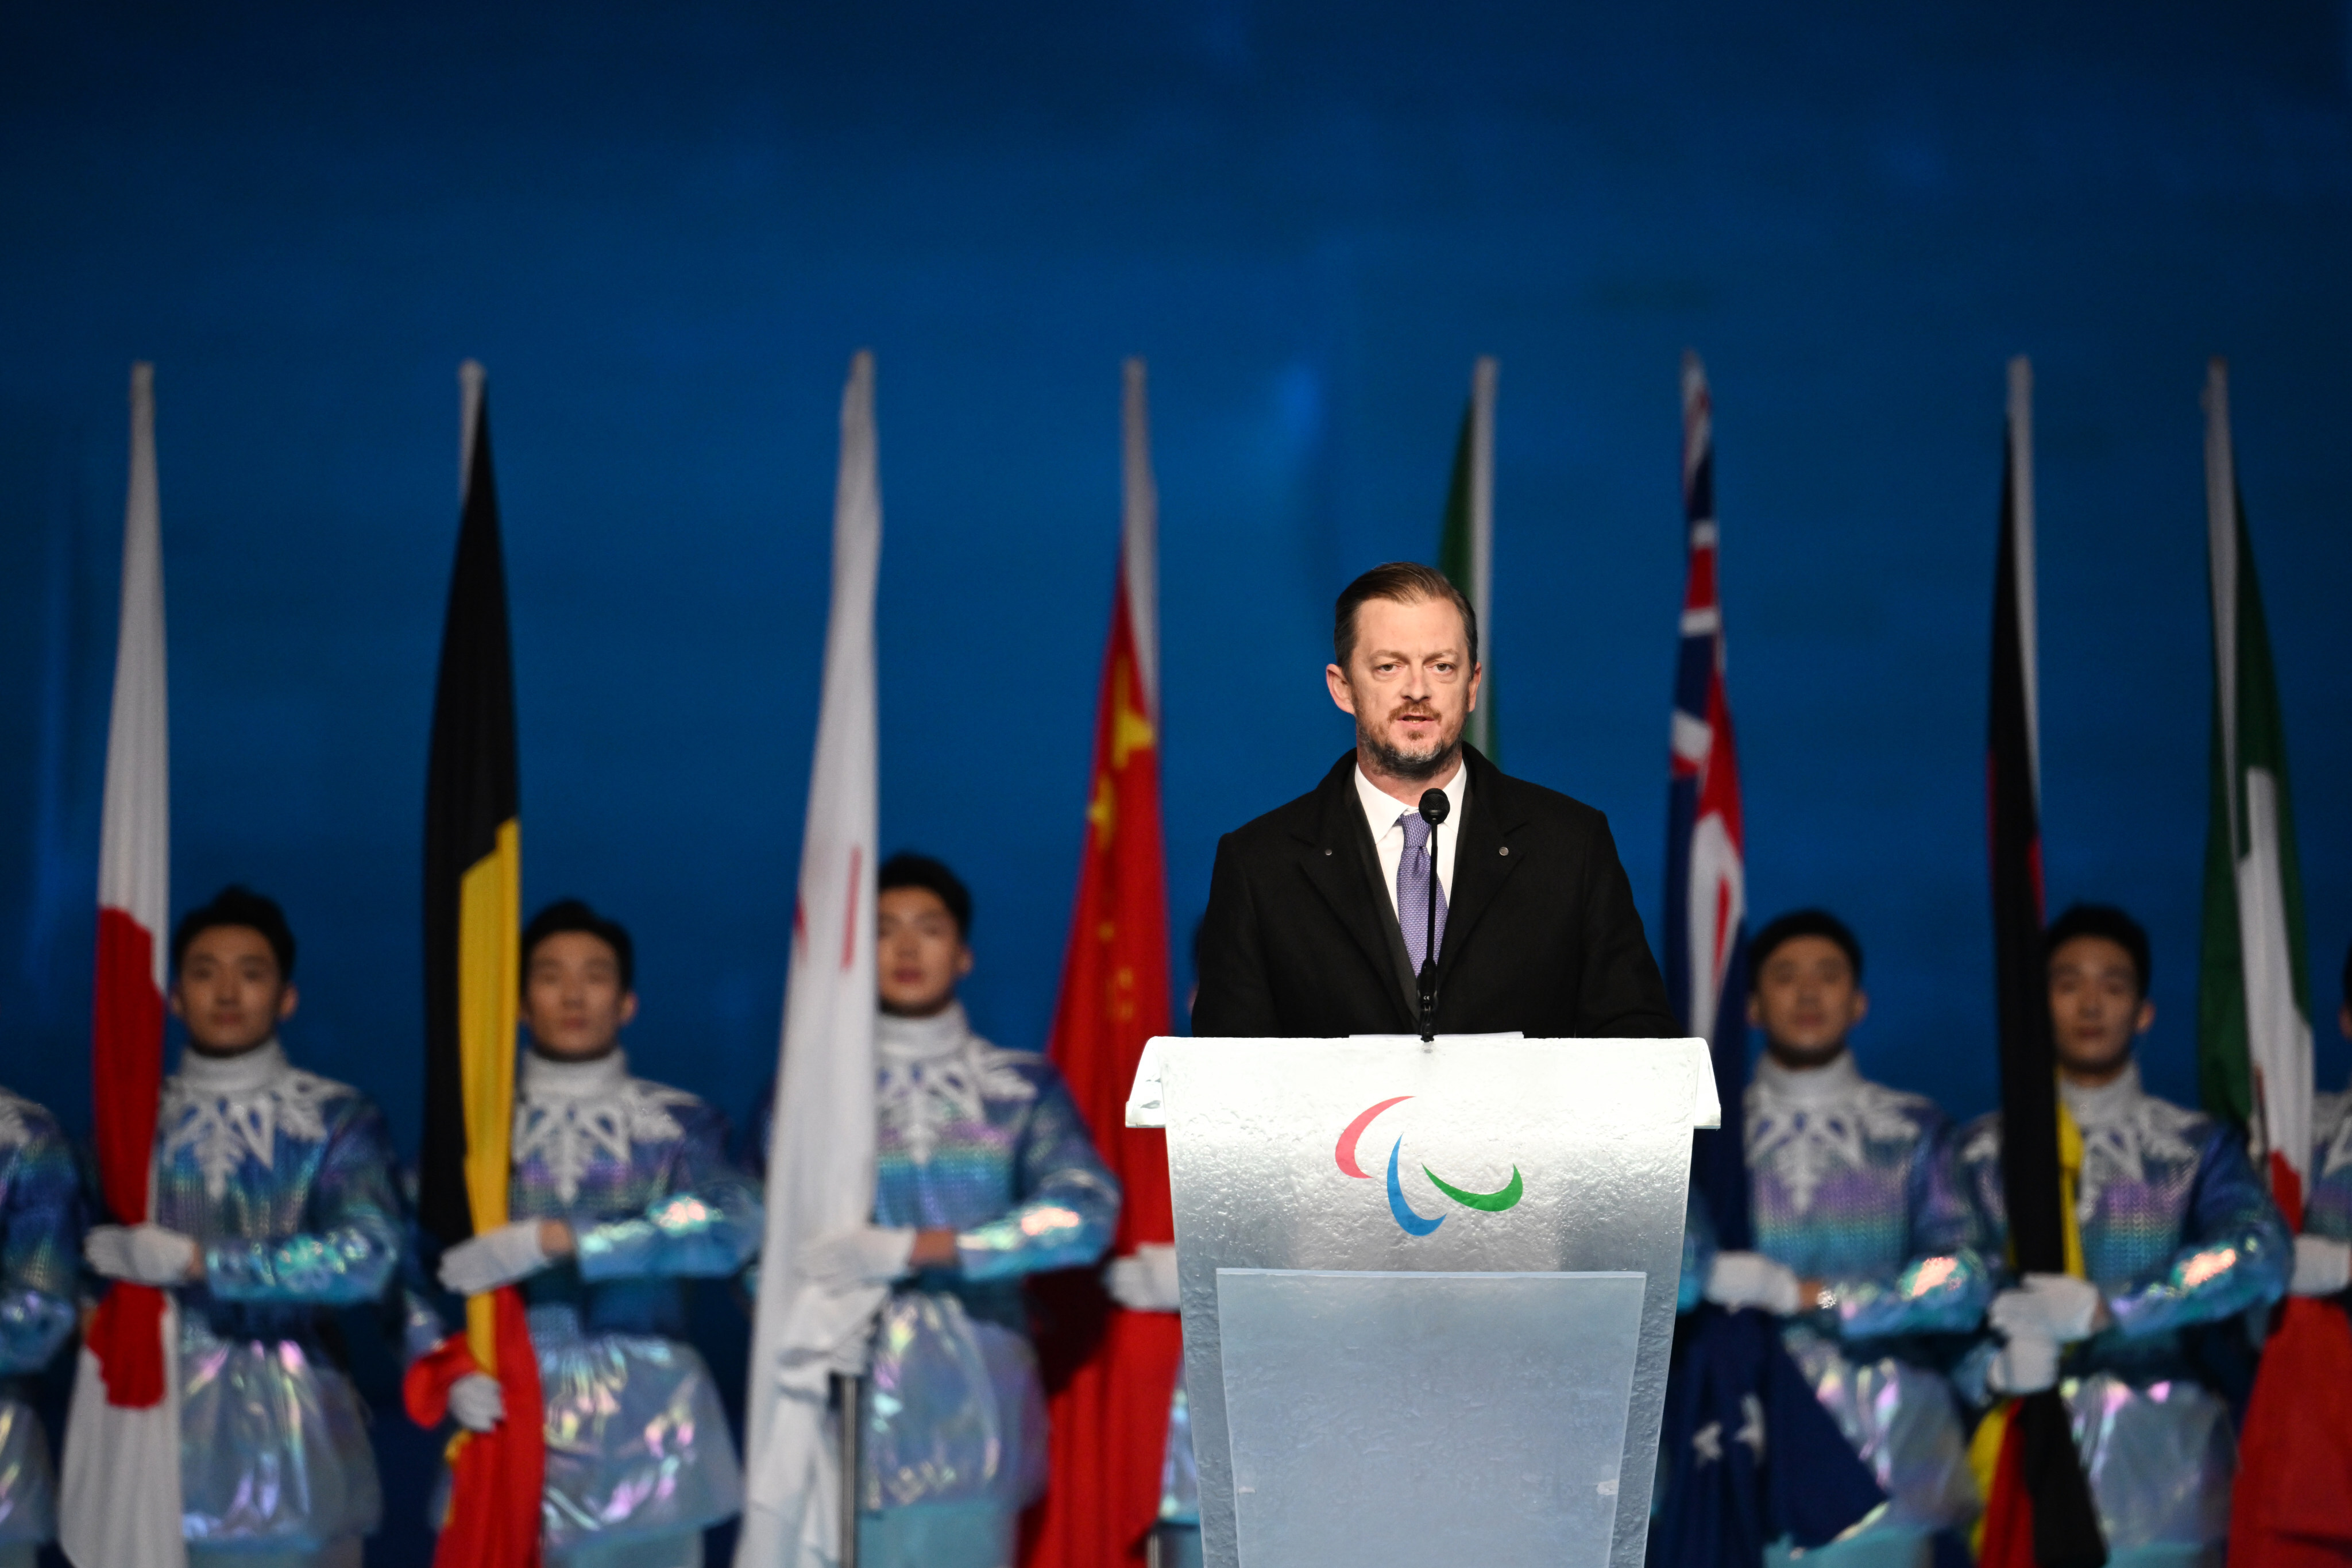 IPC president Andrew Parsons delivered a passionate speech during the opening ceremony of the Beijing 2022 Paralympic Winter Games. Photo: Xinhua